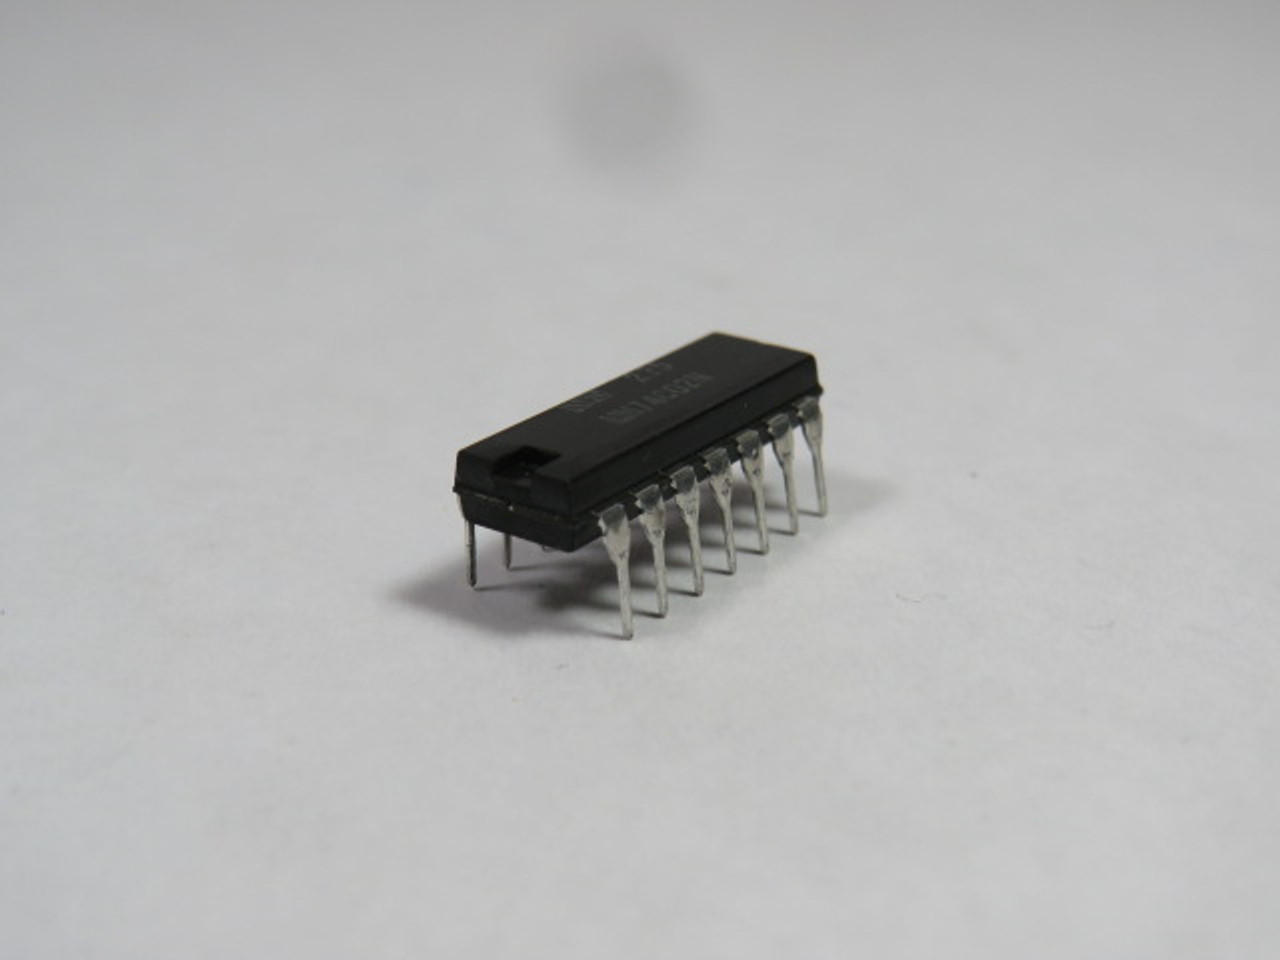 National MM74C02N 2-Input Quad Nor Gate IC Chip USED